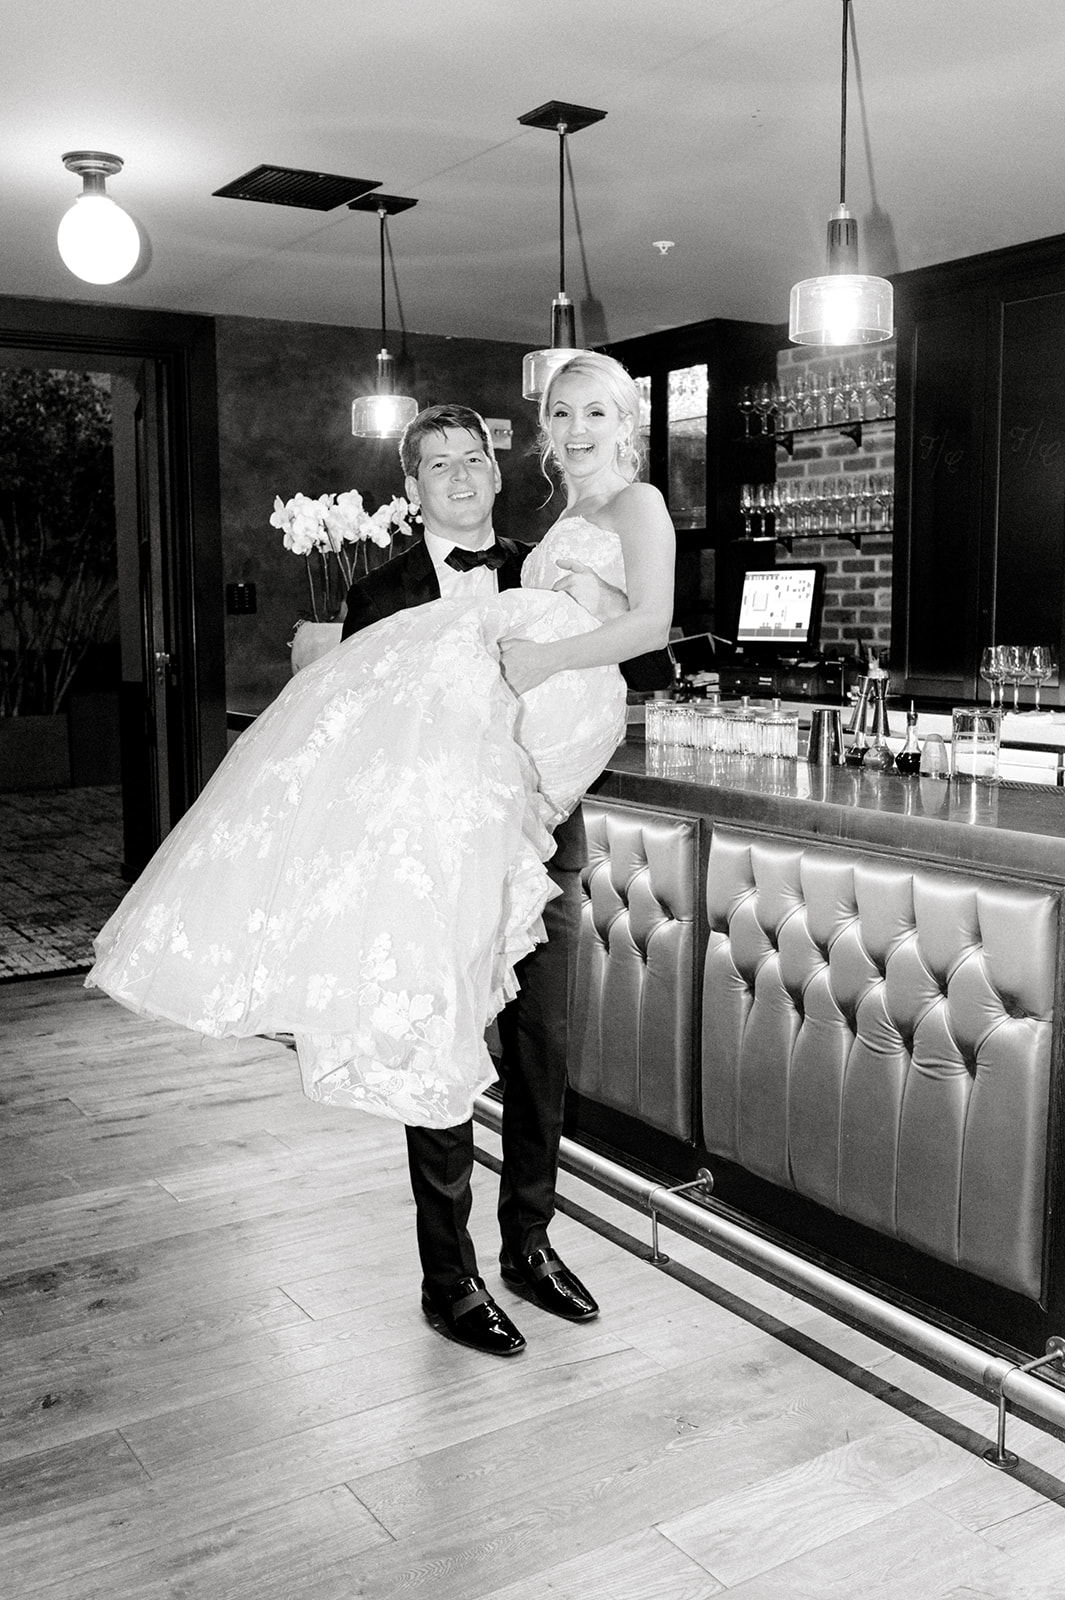 chic moment of bride and groom in black and white for Secret Urban Garden Wedding at Philadelphia’s Fitler Club